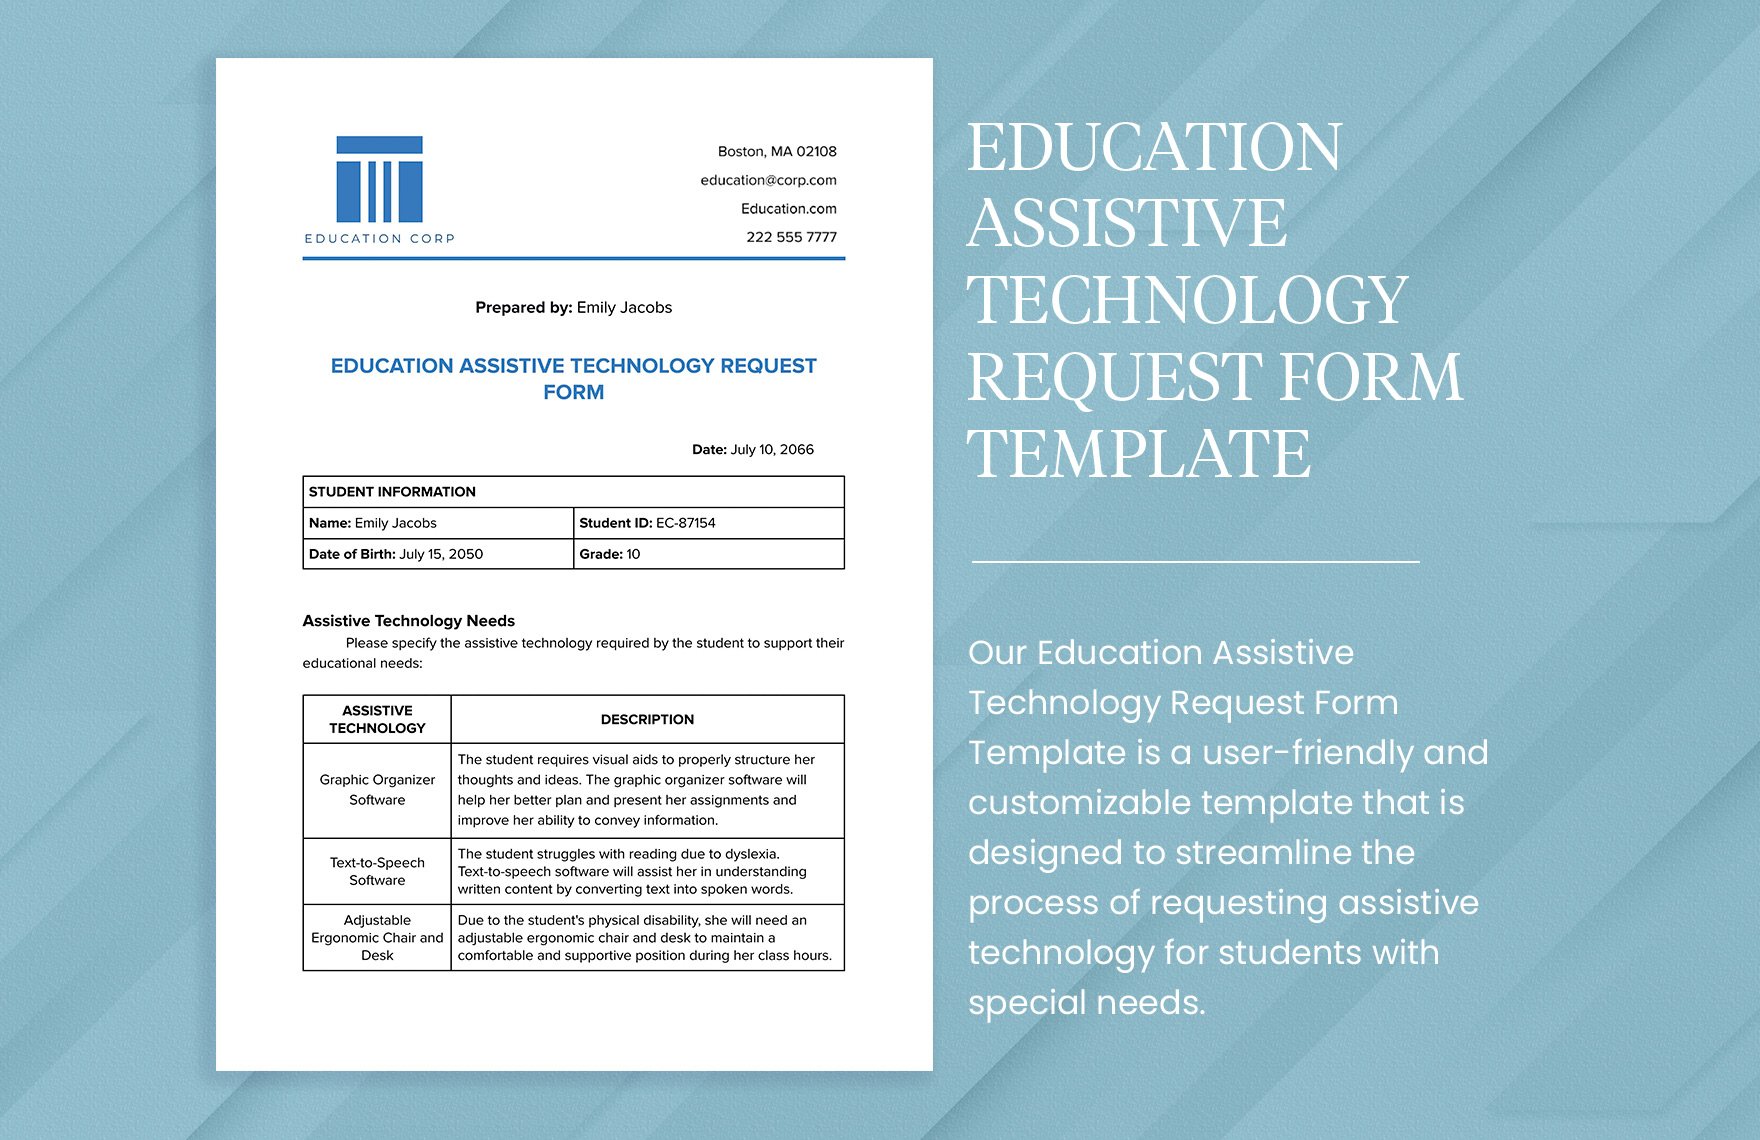 Education Assistive Technology Request Form Template in Word, Google Docs, PDF